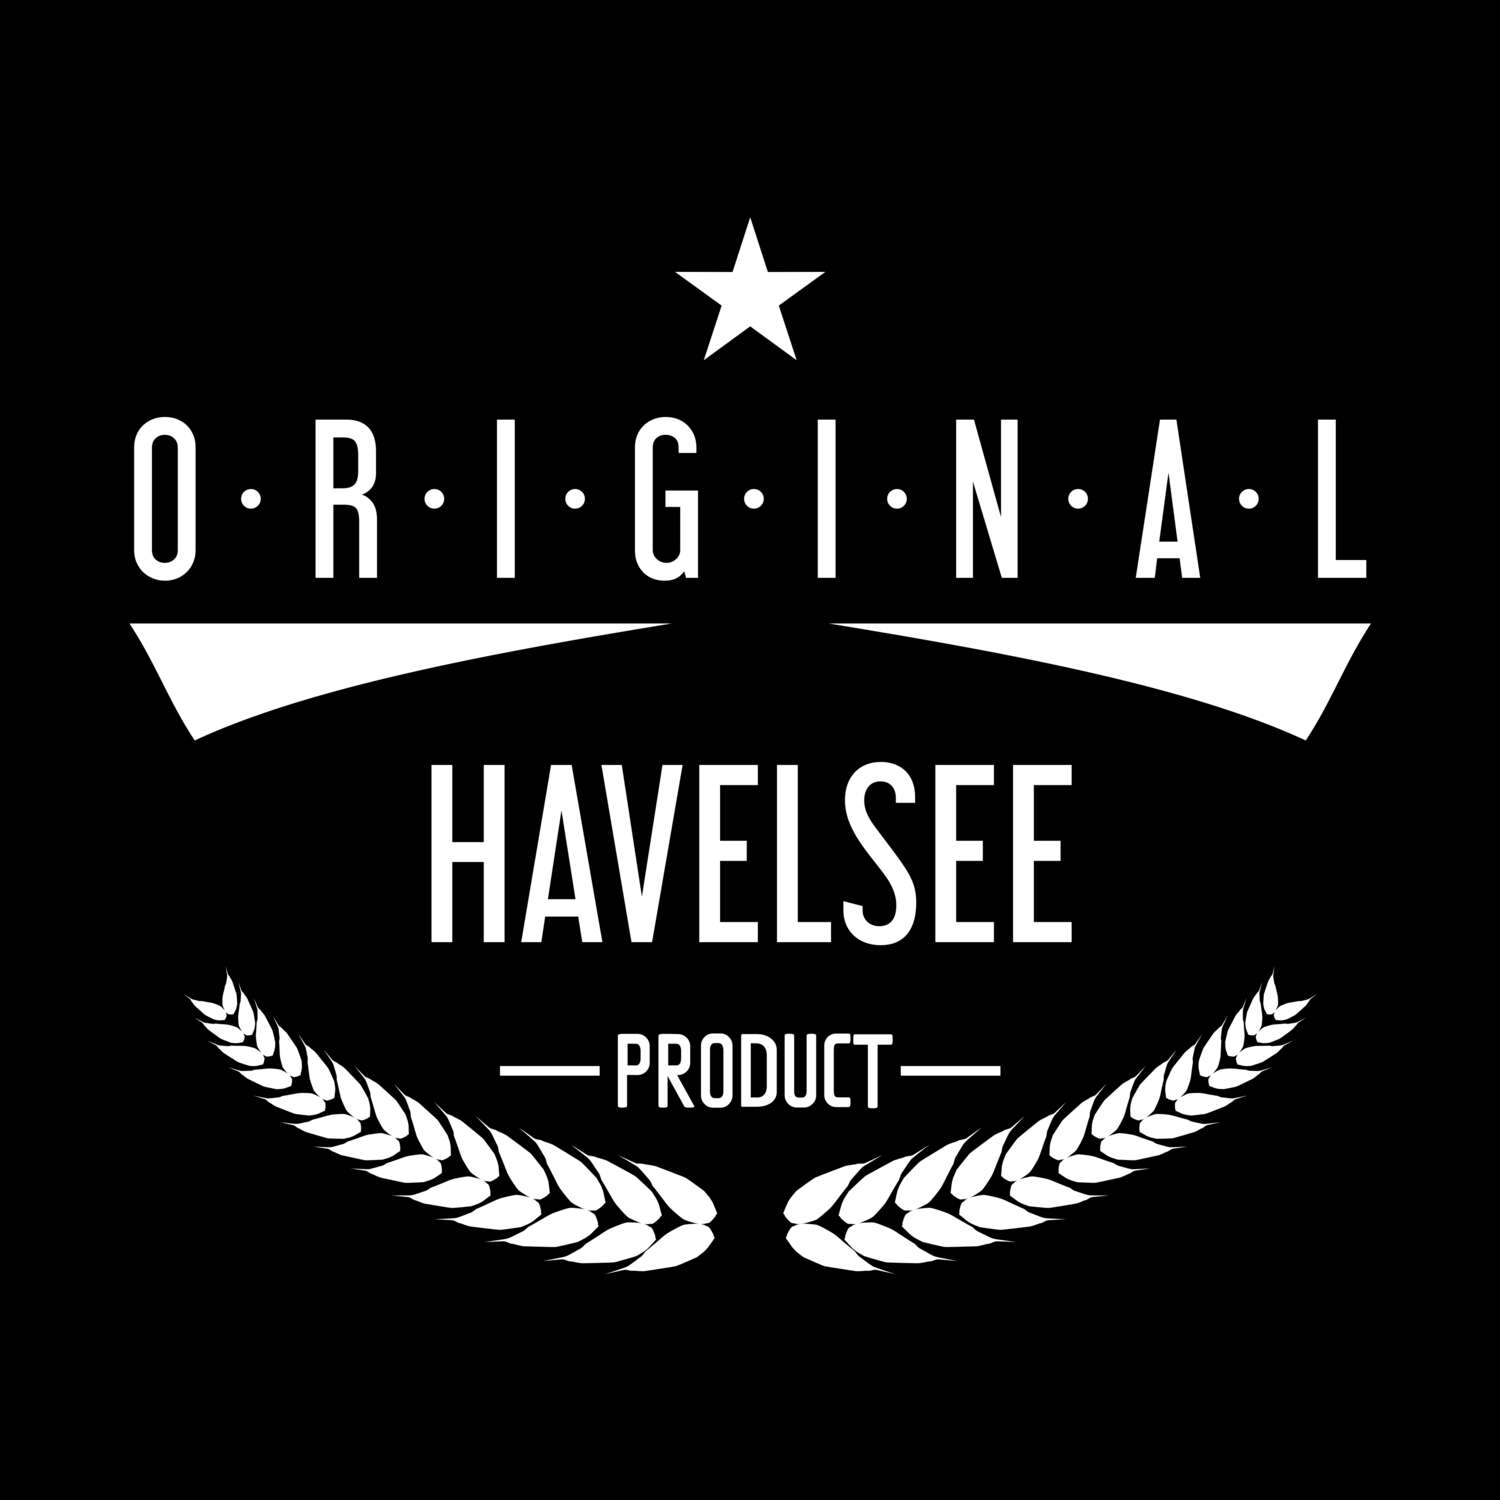 Havelsee T-Shirt »Original Product«